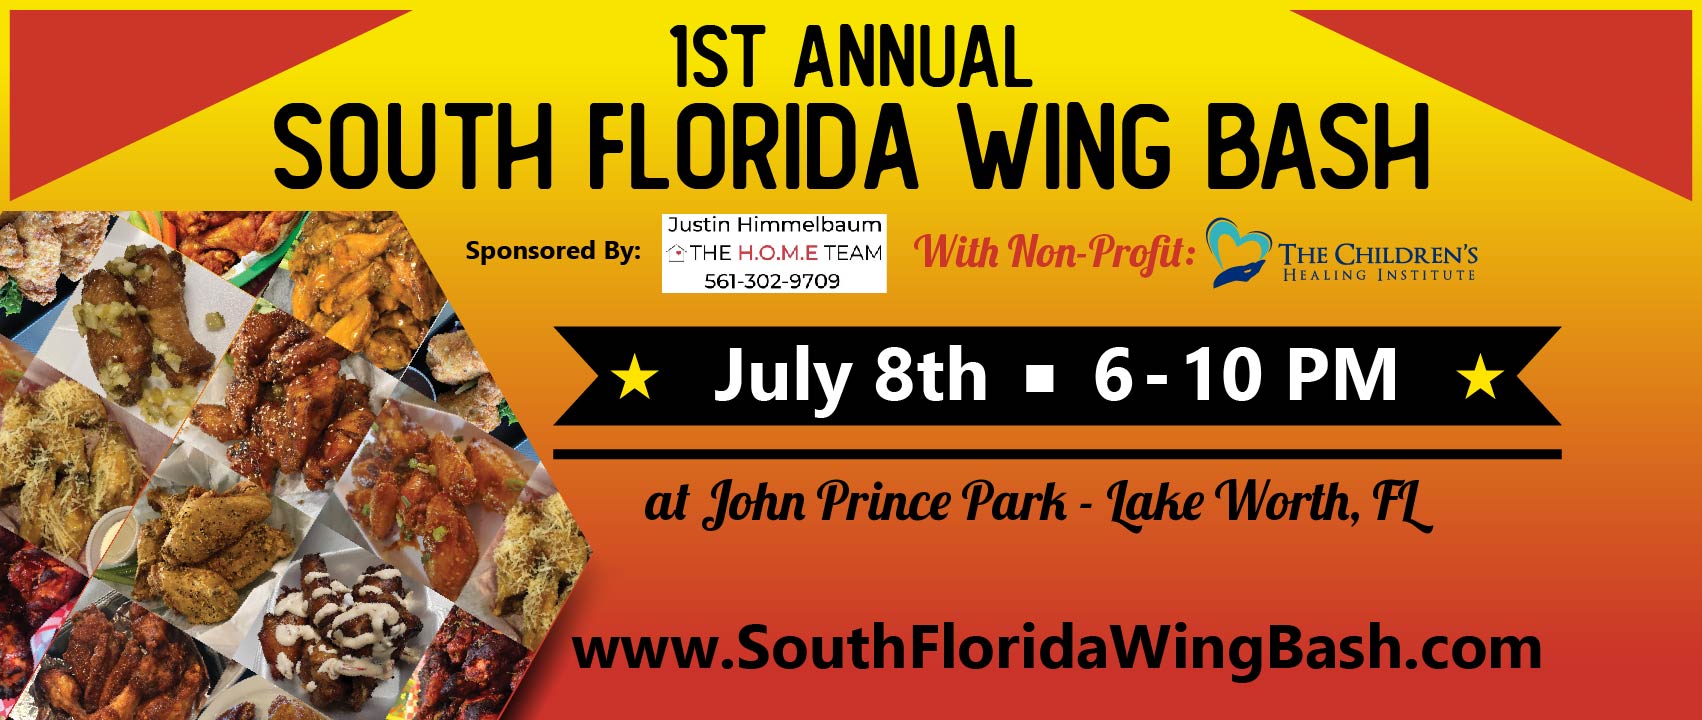 South Florida Wing Bash The Children's Healing Institute